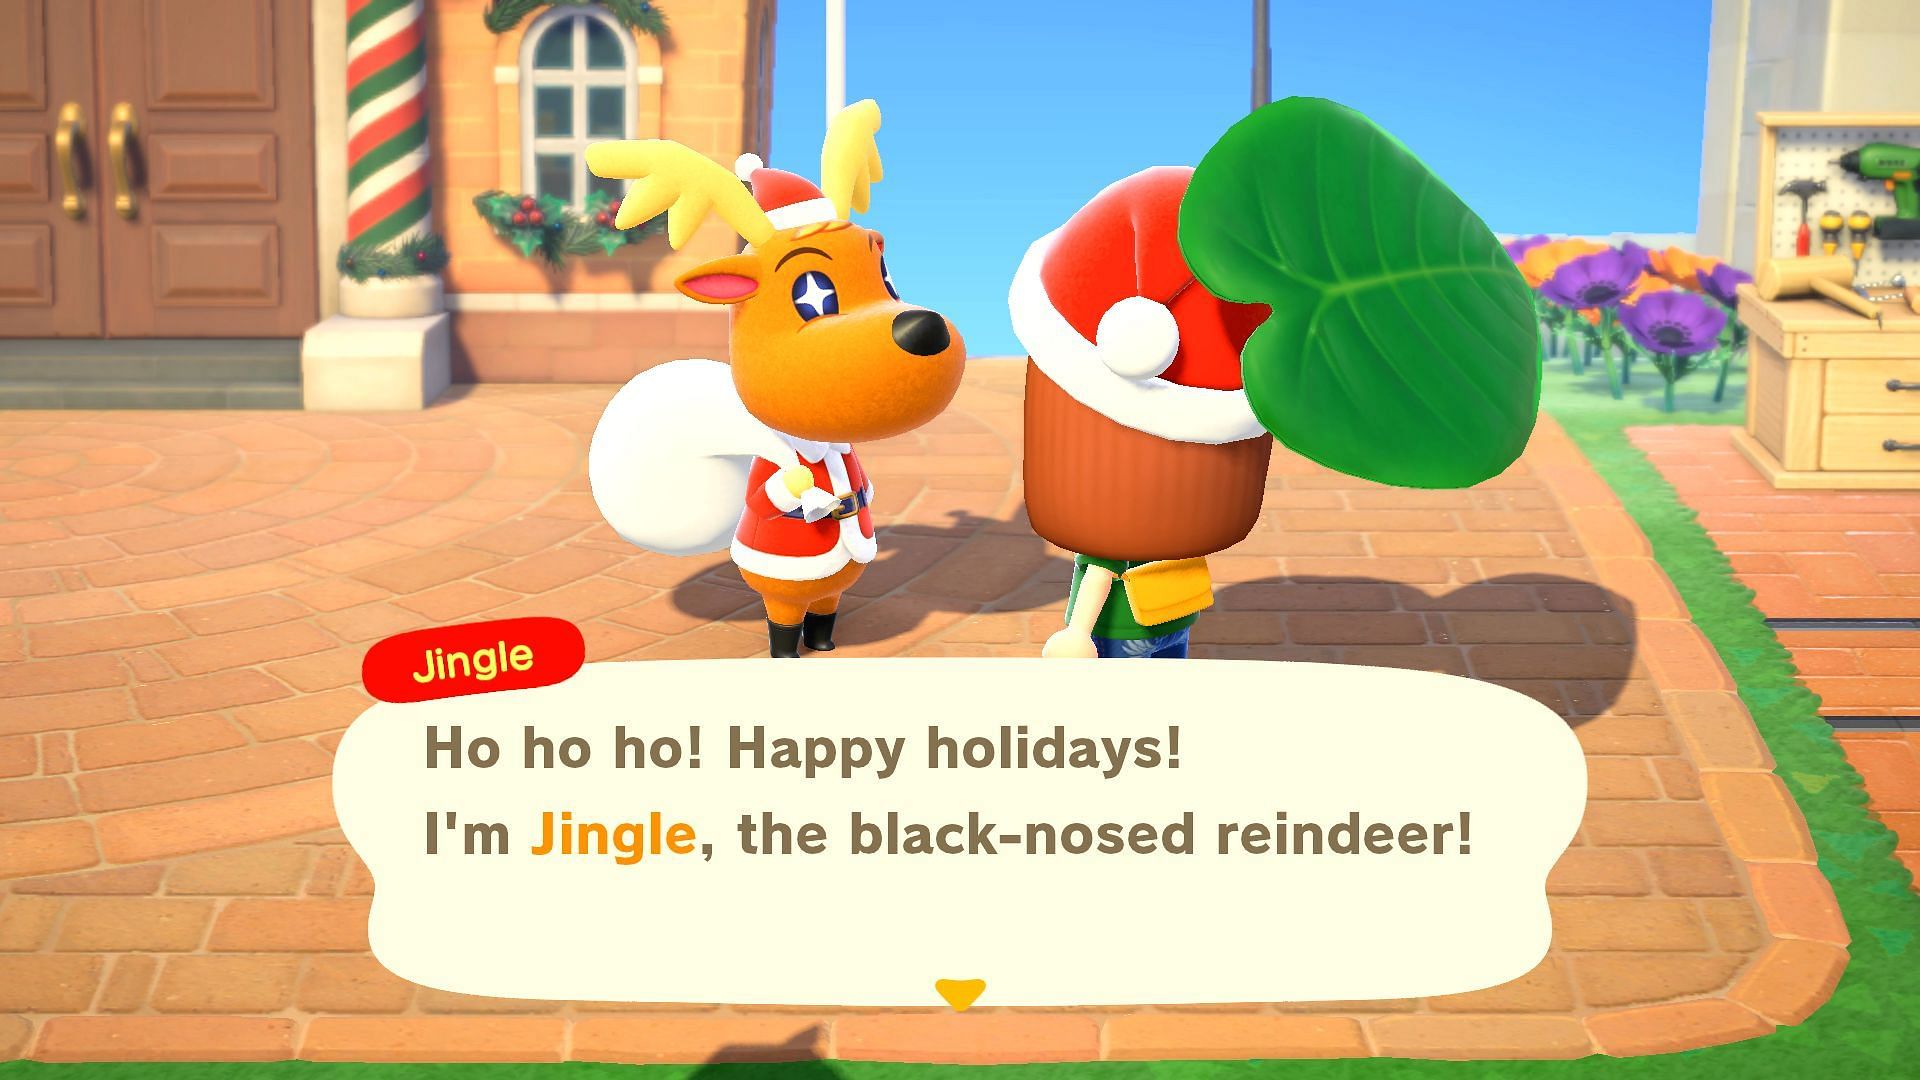 Jingle runs the events on Toy Day in Animal Crossing (Image via Nintendo)